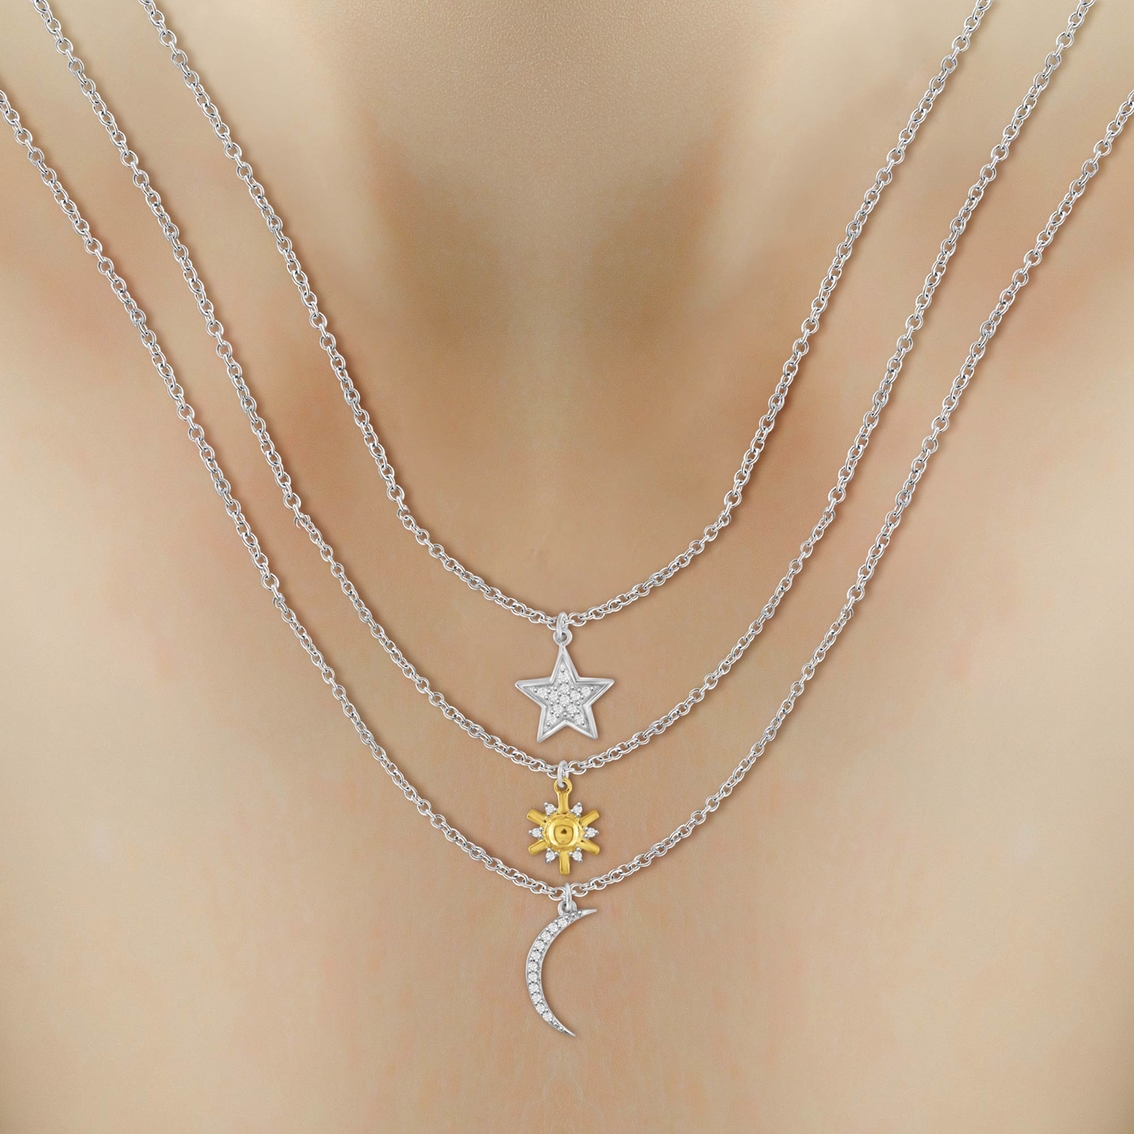 She Shines 14K Gold Over Sterling Silver 1/10 CTW Diamond Sun Moon Star Necklace - Image 2 of 2